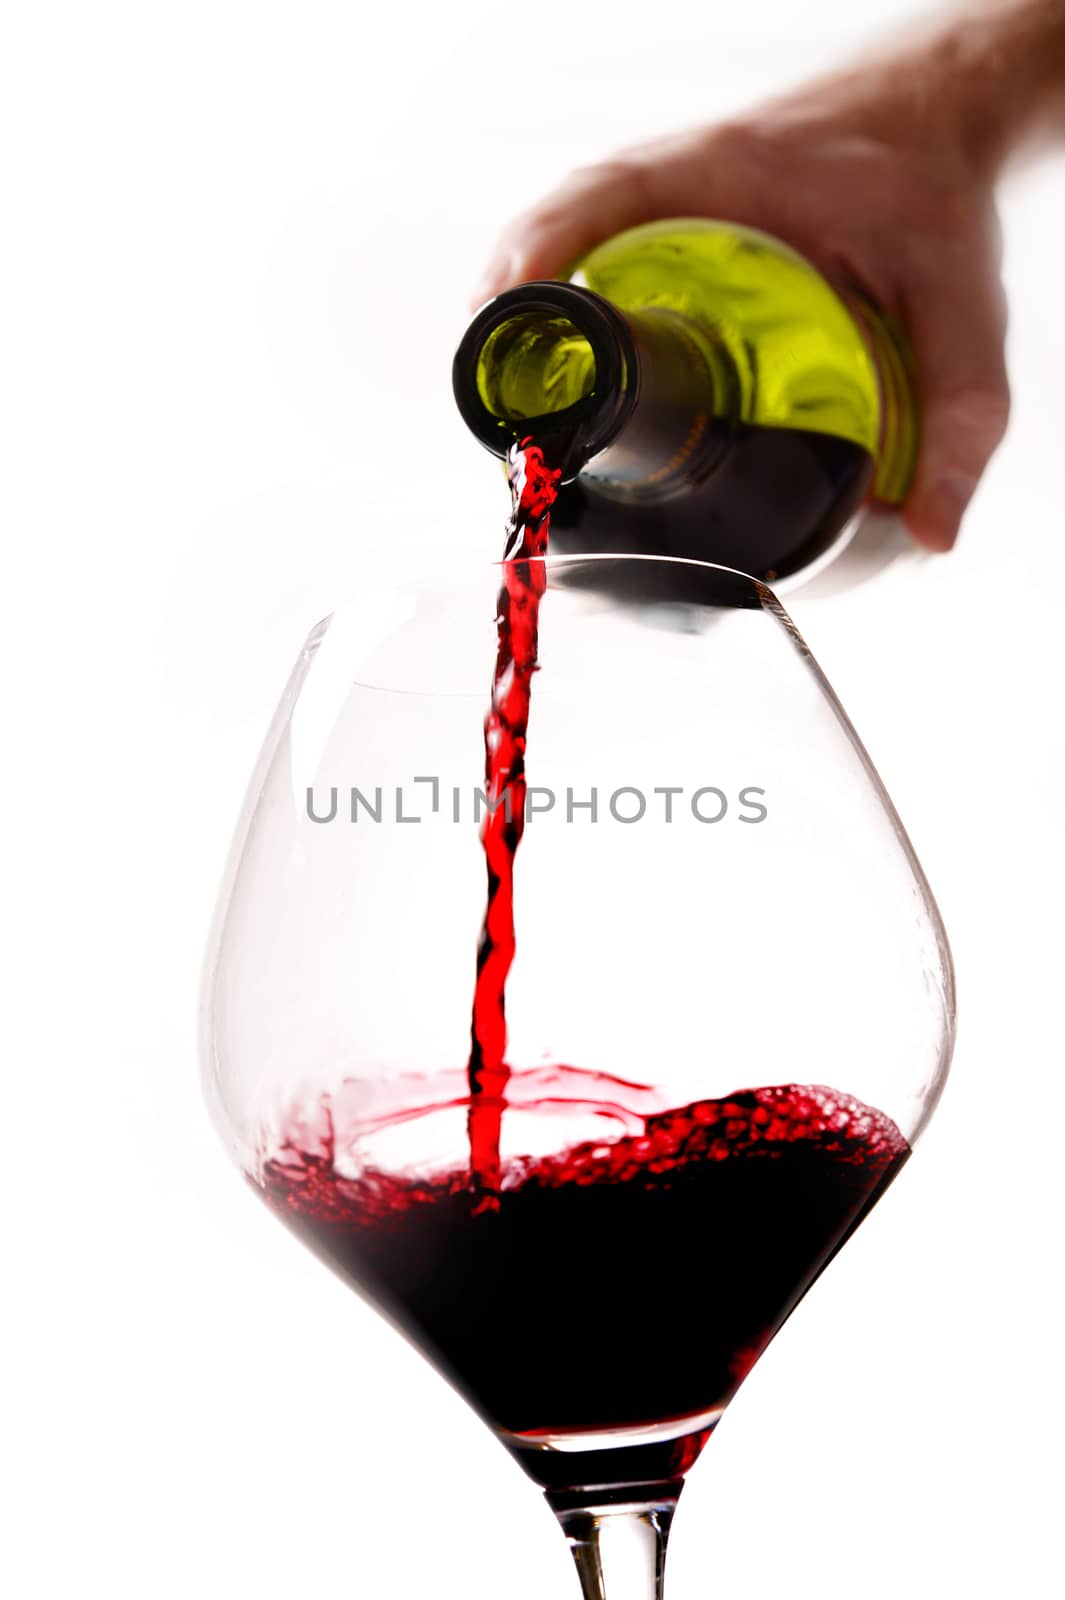 Man Hand holding Bottle filling Glass with Red Wine by ocusfocus